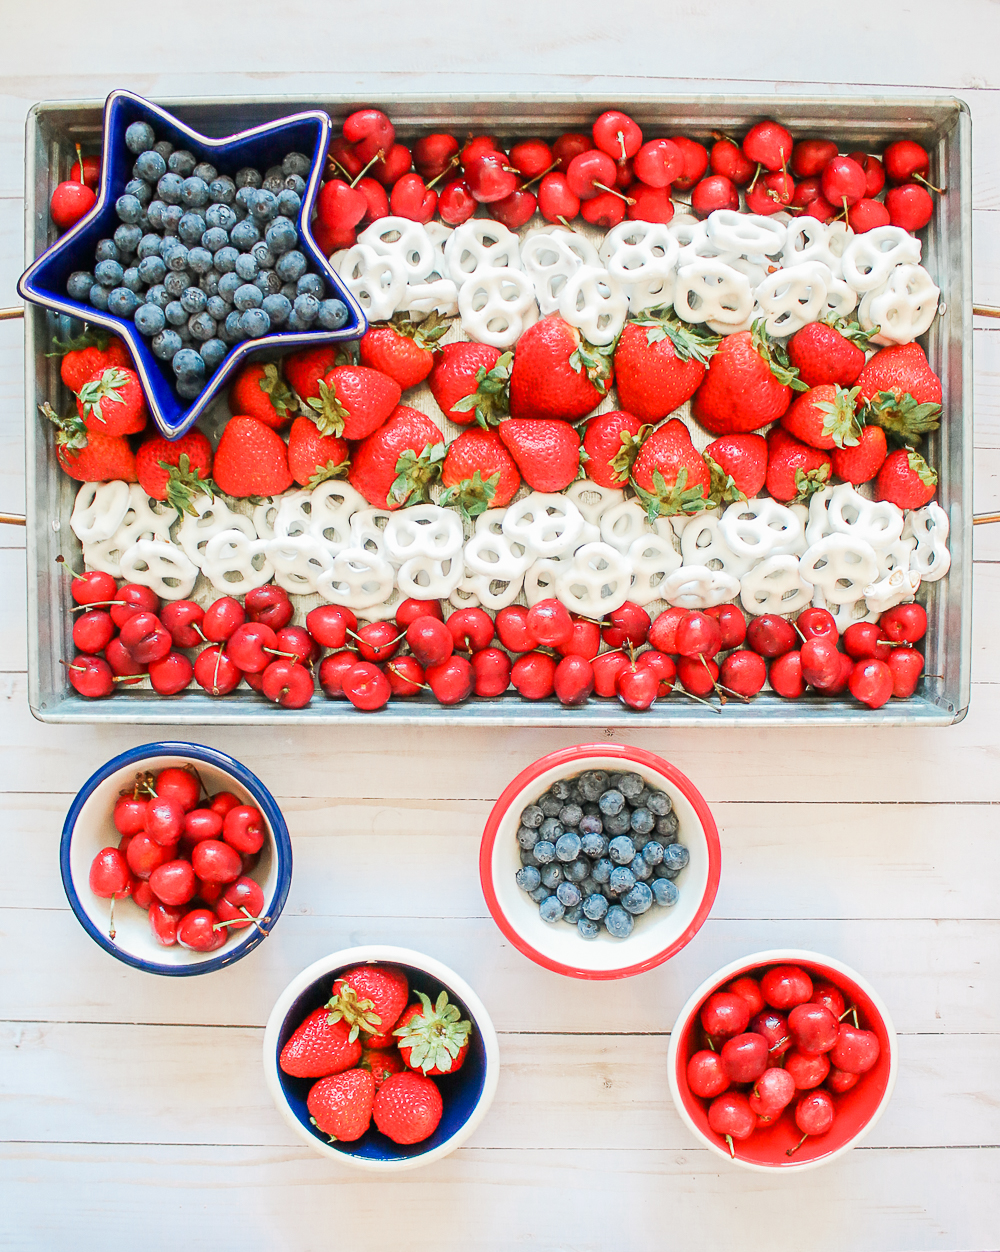 American flag snack tray created by blogger Stephanie Ziajka on Diary of a Debutante